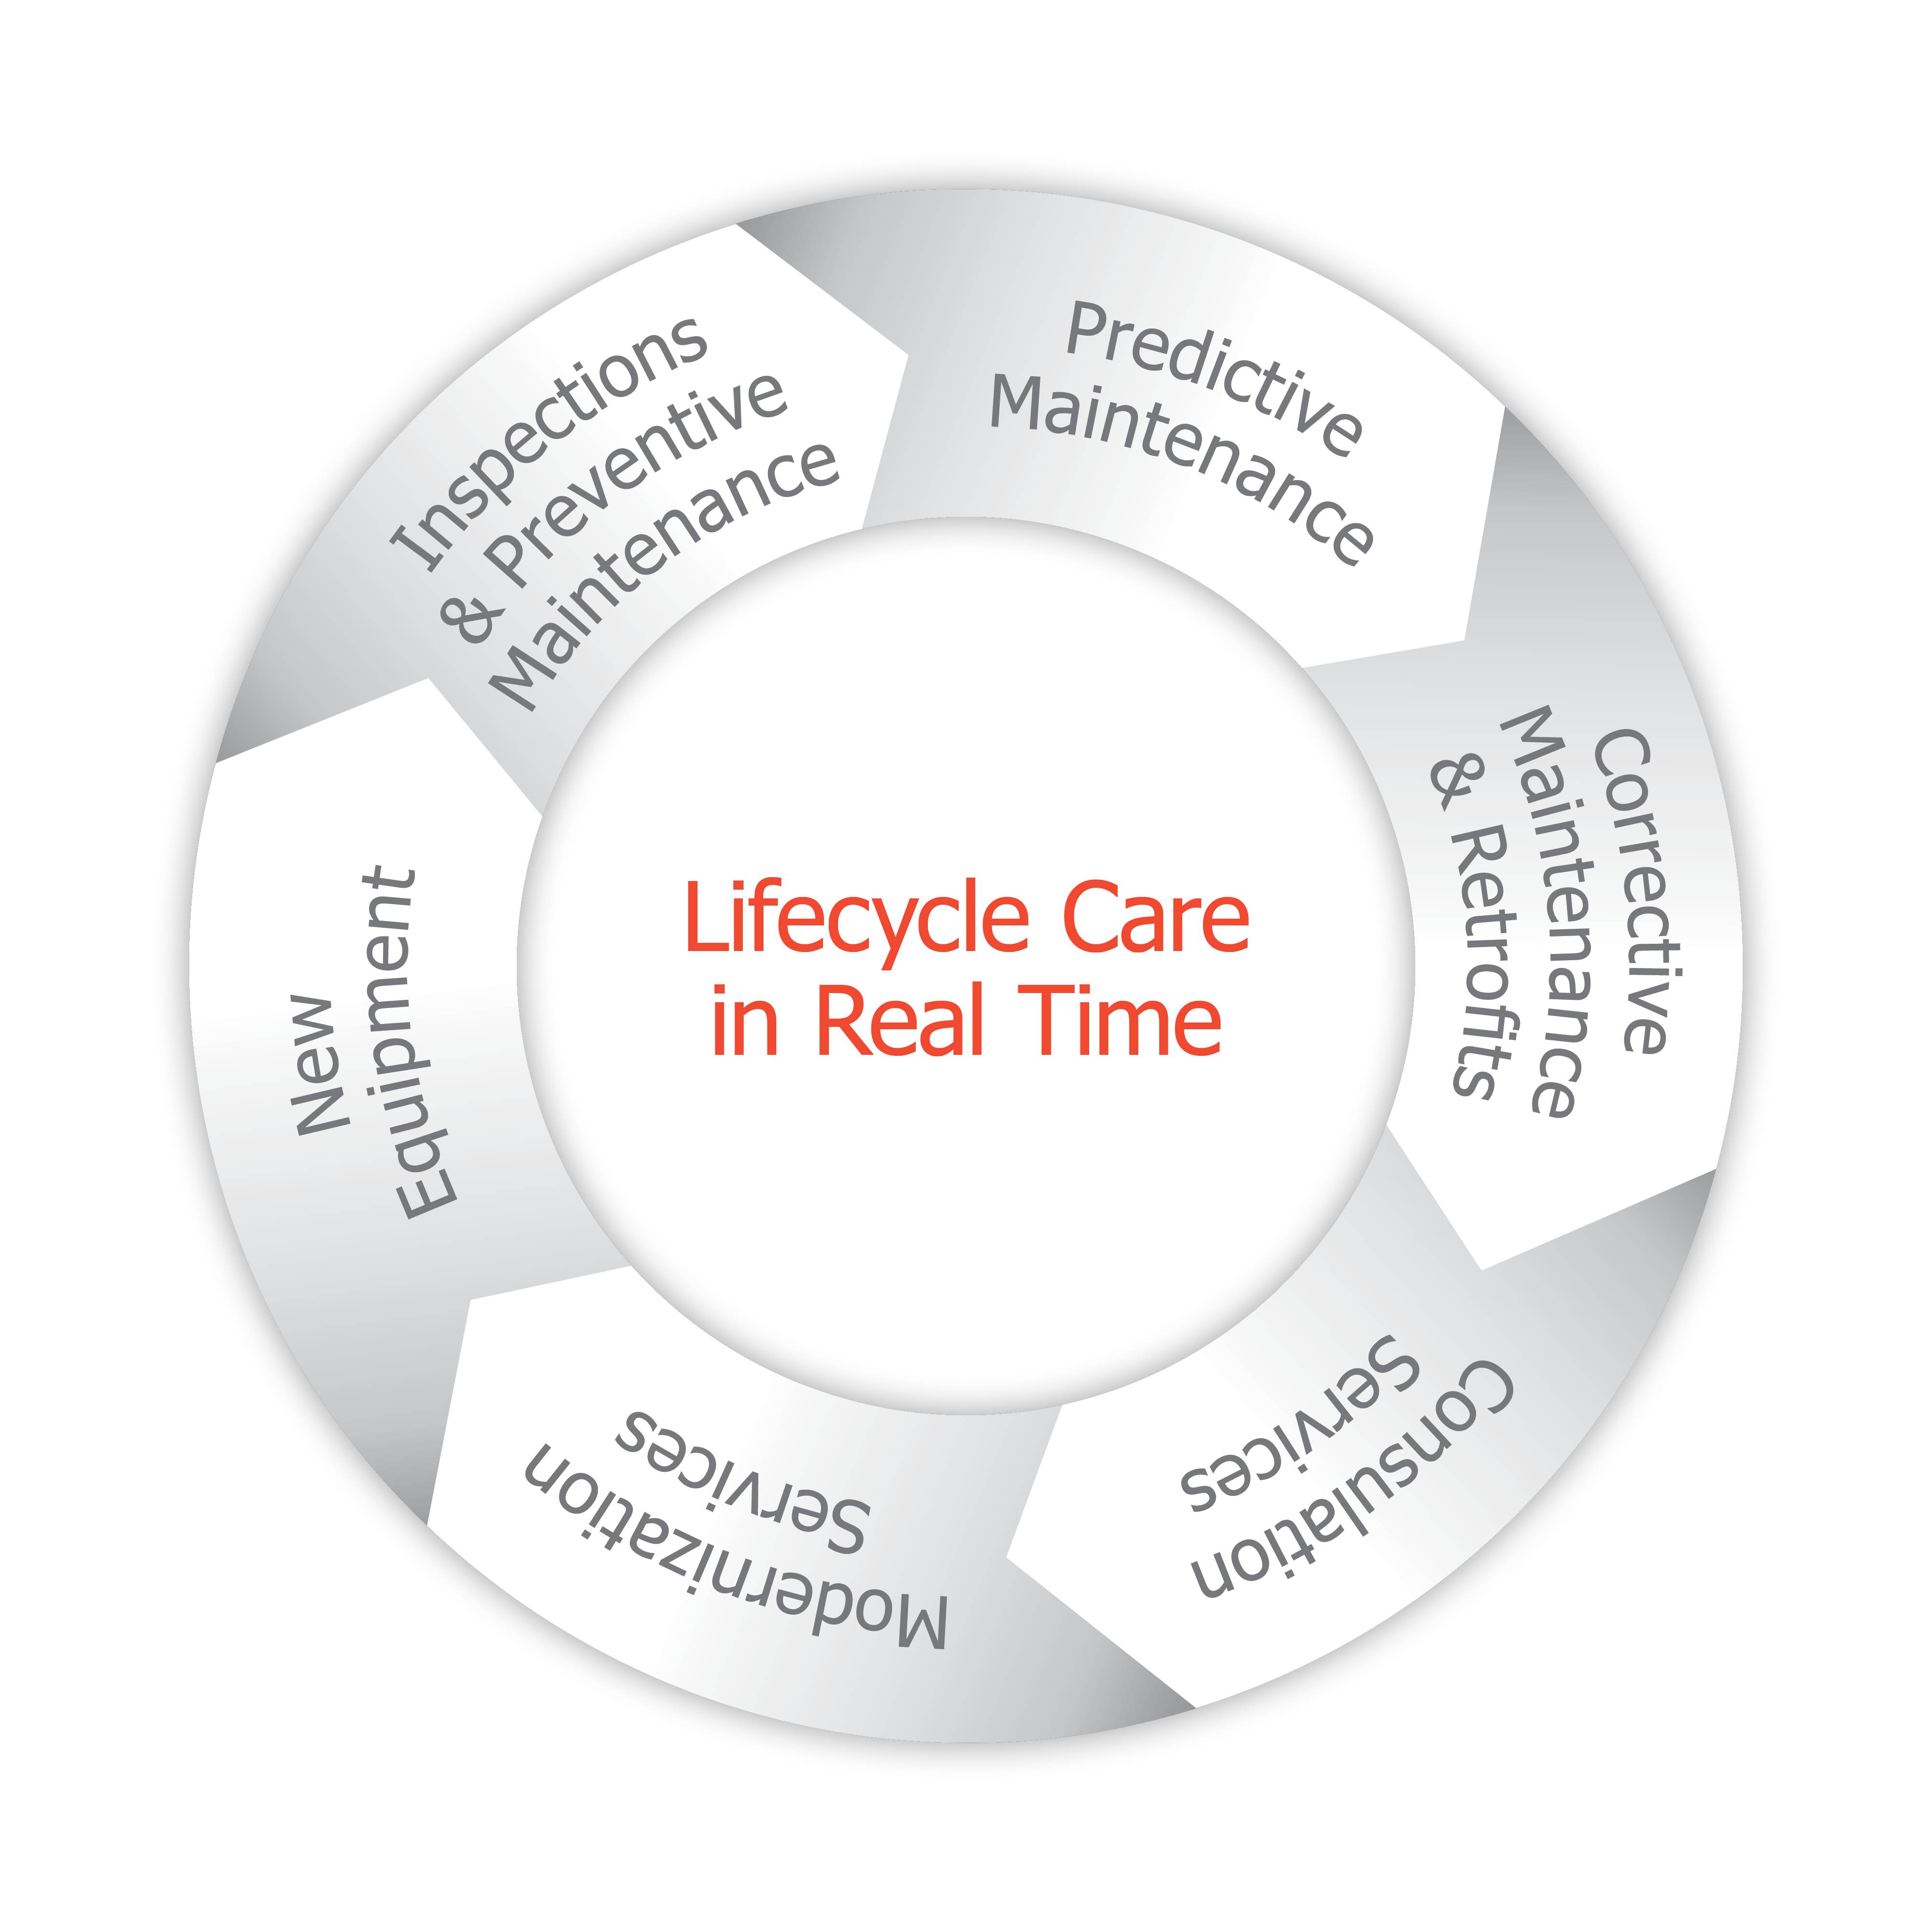 Lifecycle Care in Real Time